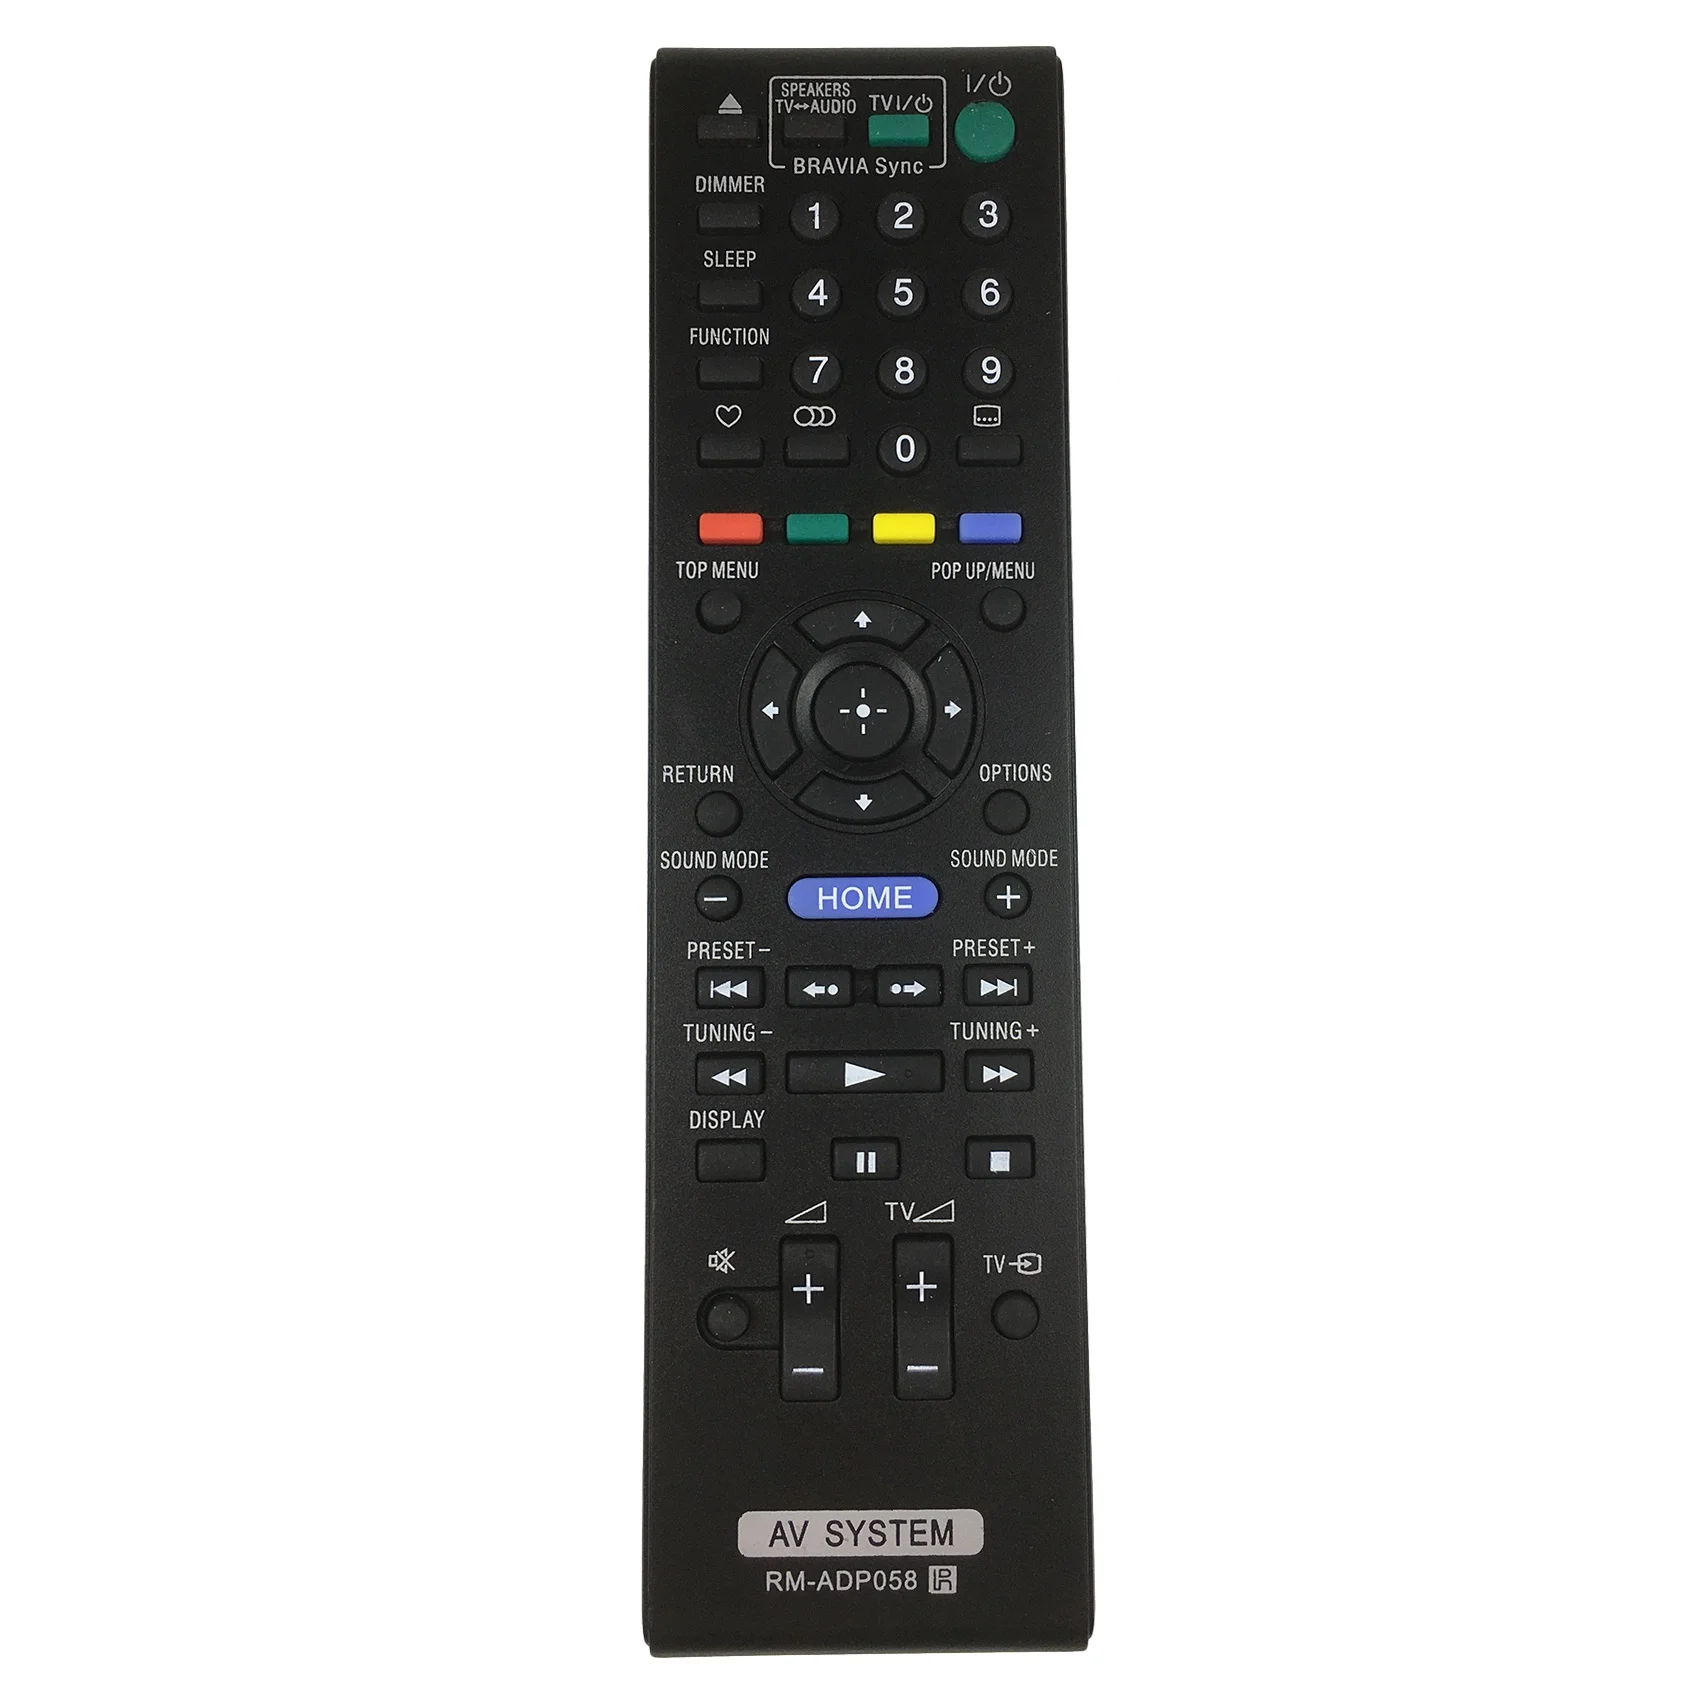 

RM-ADP058 Remote Control for Sony Home Theater Blu-Ray Remote Control BDV-E280 BDV-E380 Remote